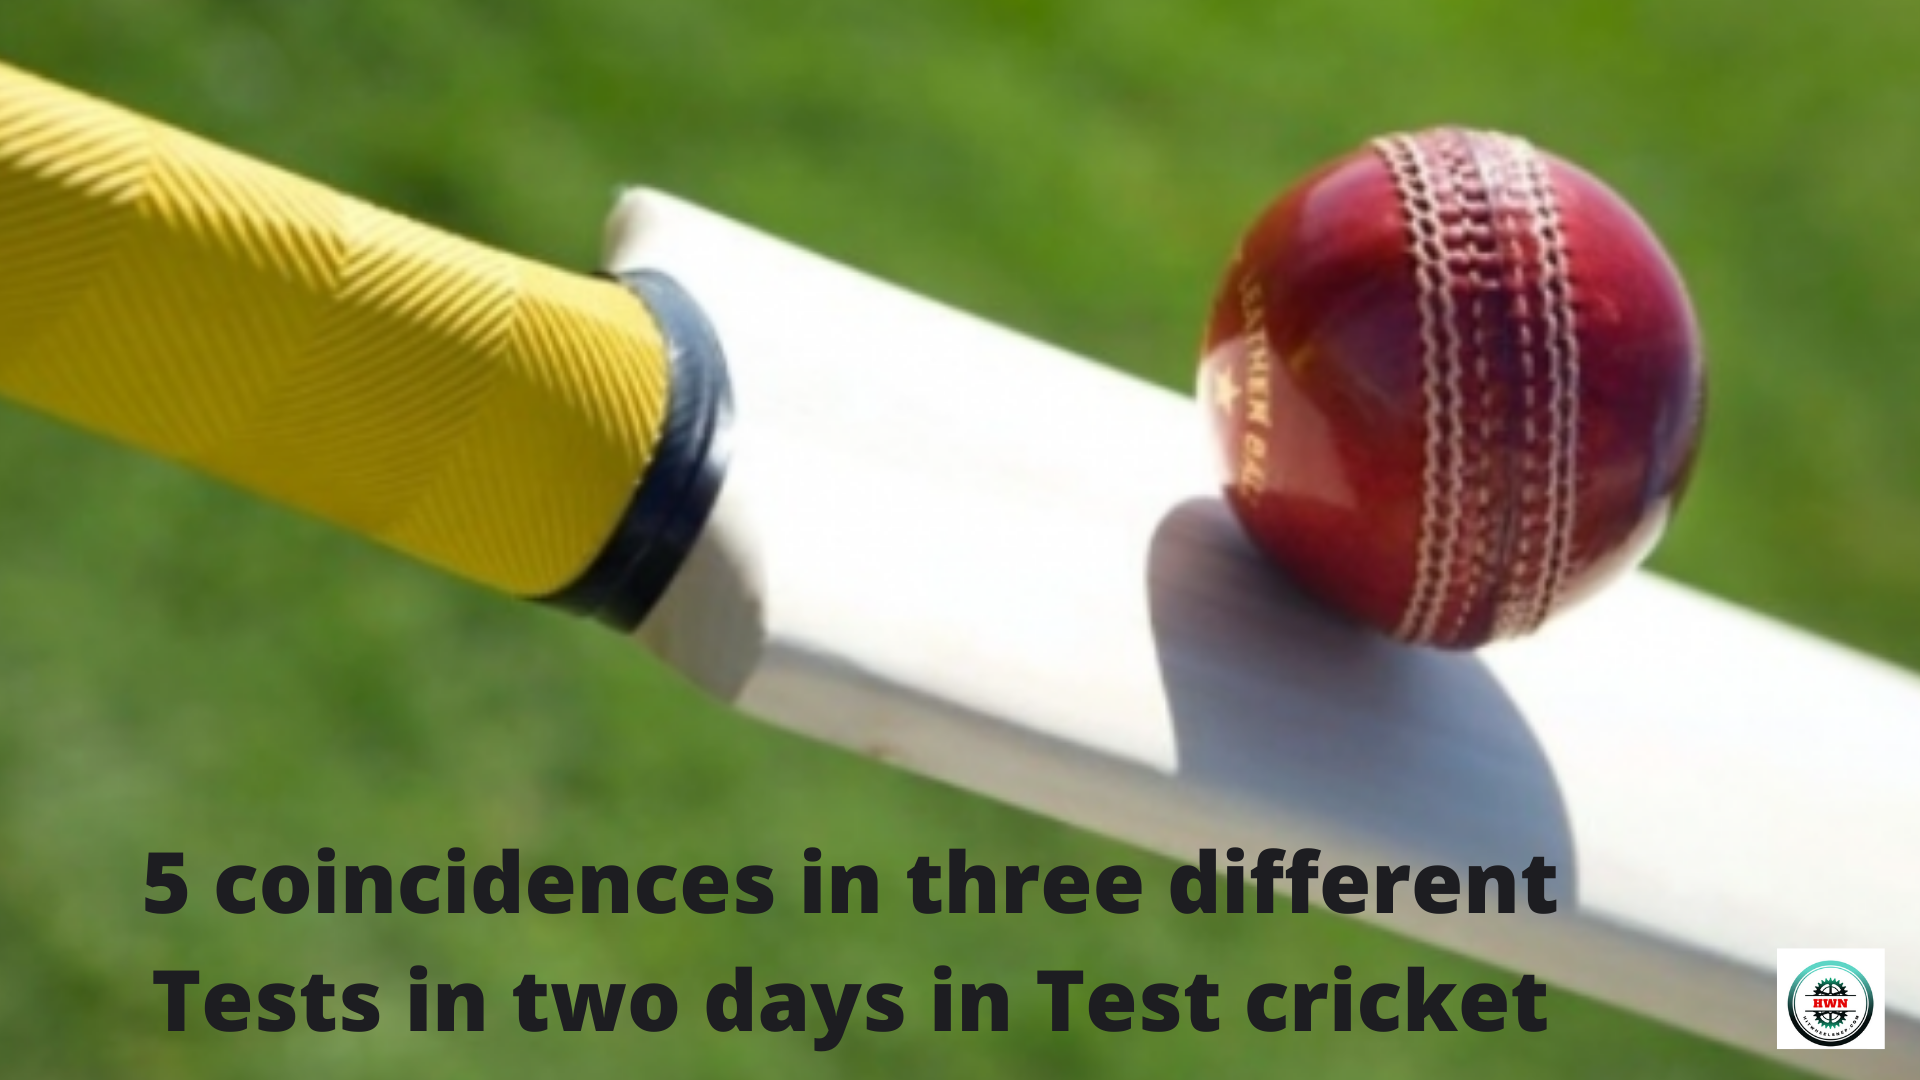 5 coincidences in three different Tests in two days in Test cricket